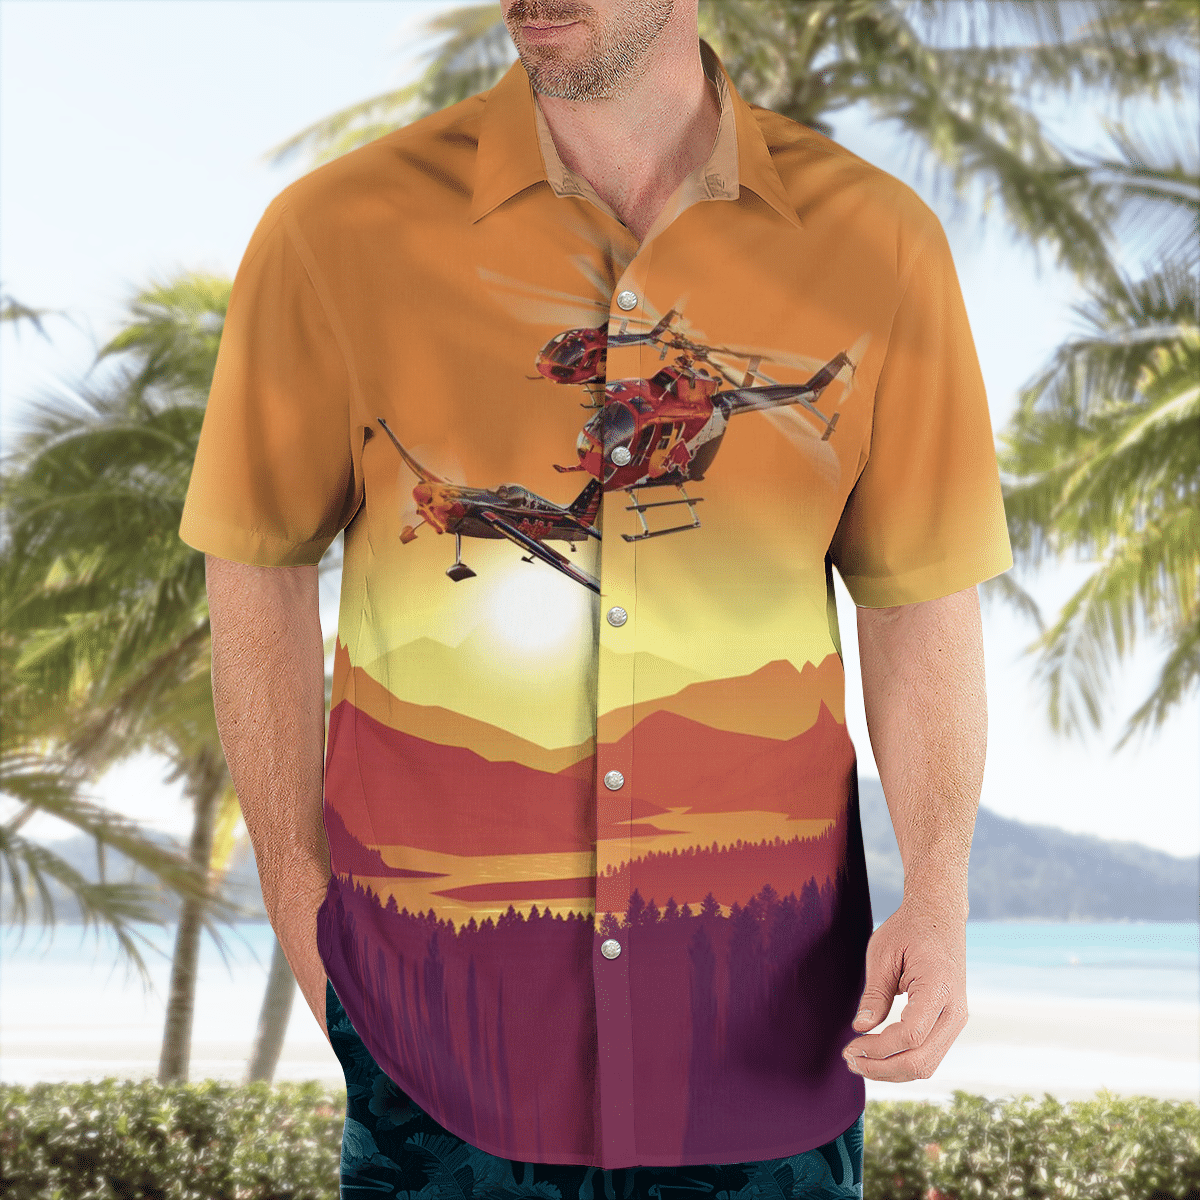 There are several styles of beach and Hawaiian shorts and tops to choose from 240